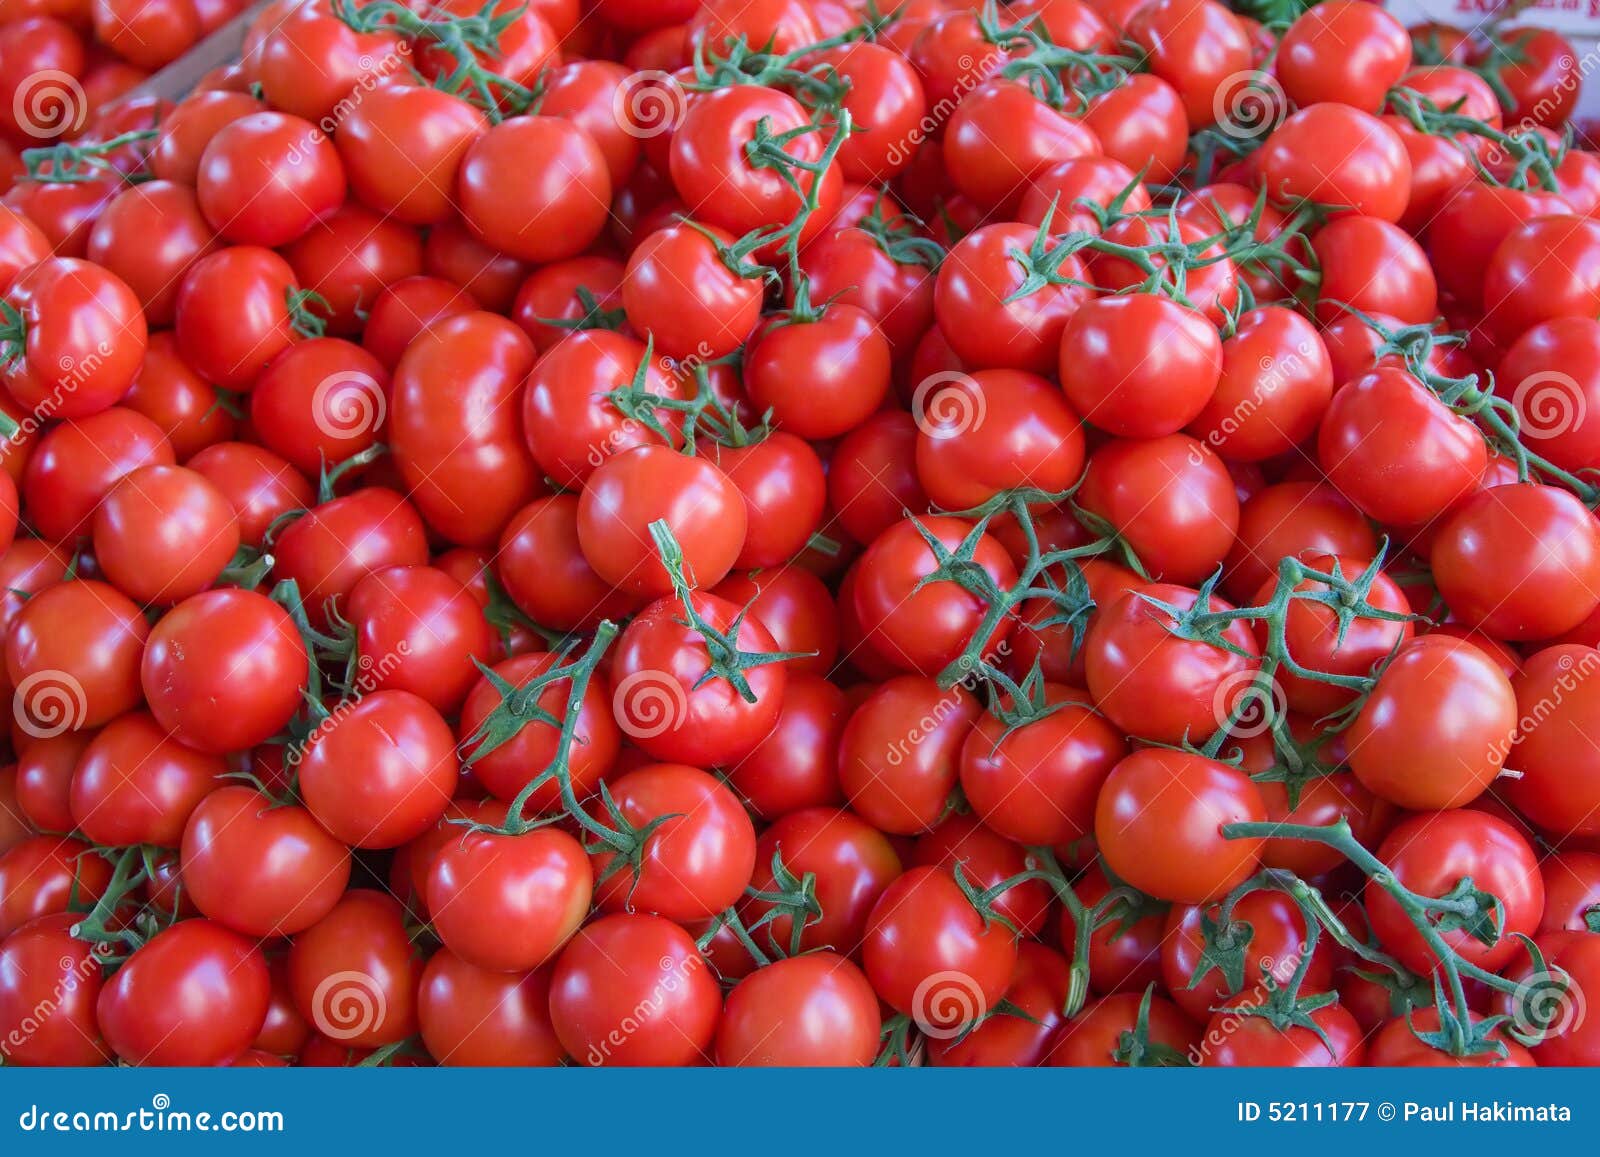 Tomatoes stock image. Image of fruits, nutritious, food - 5211177